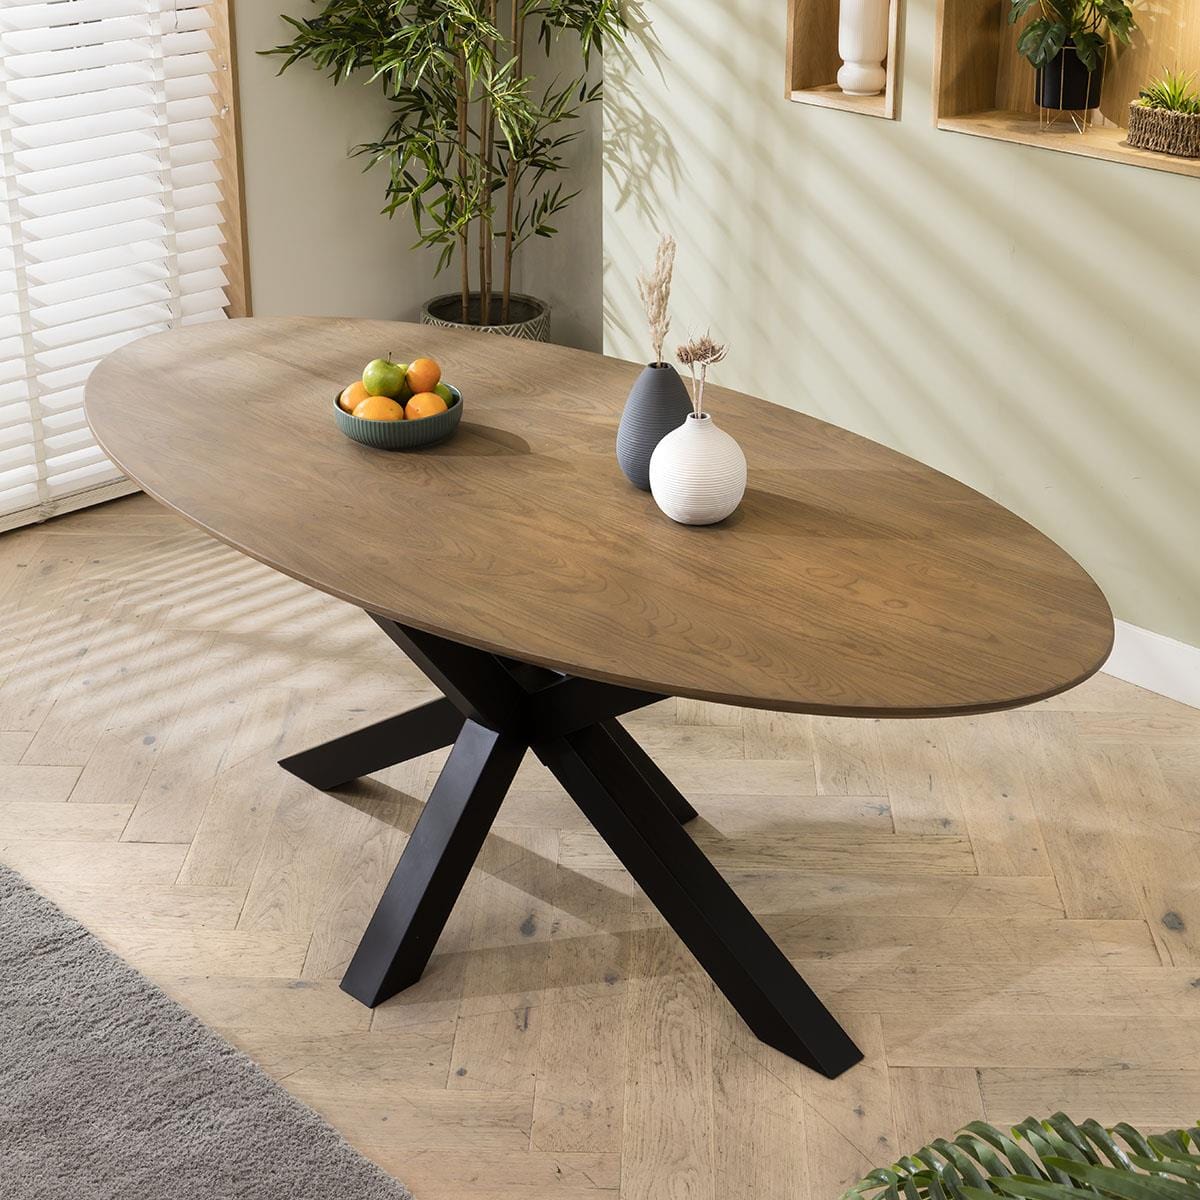 Quatropi Aries 6 Seater Solid Wooden Oval Dining Table 200cm